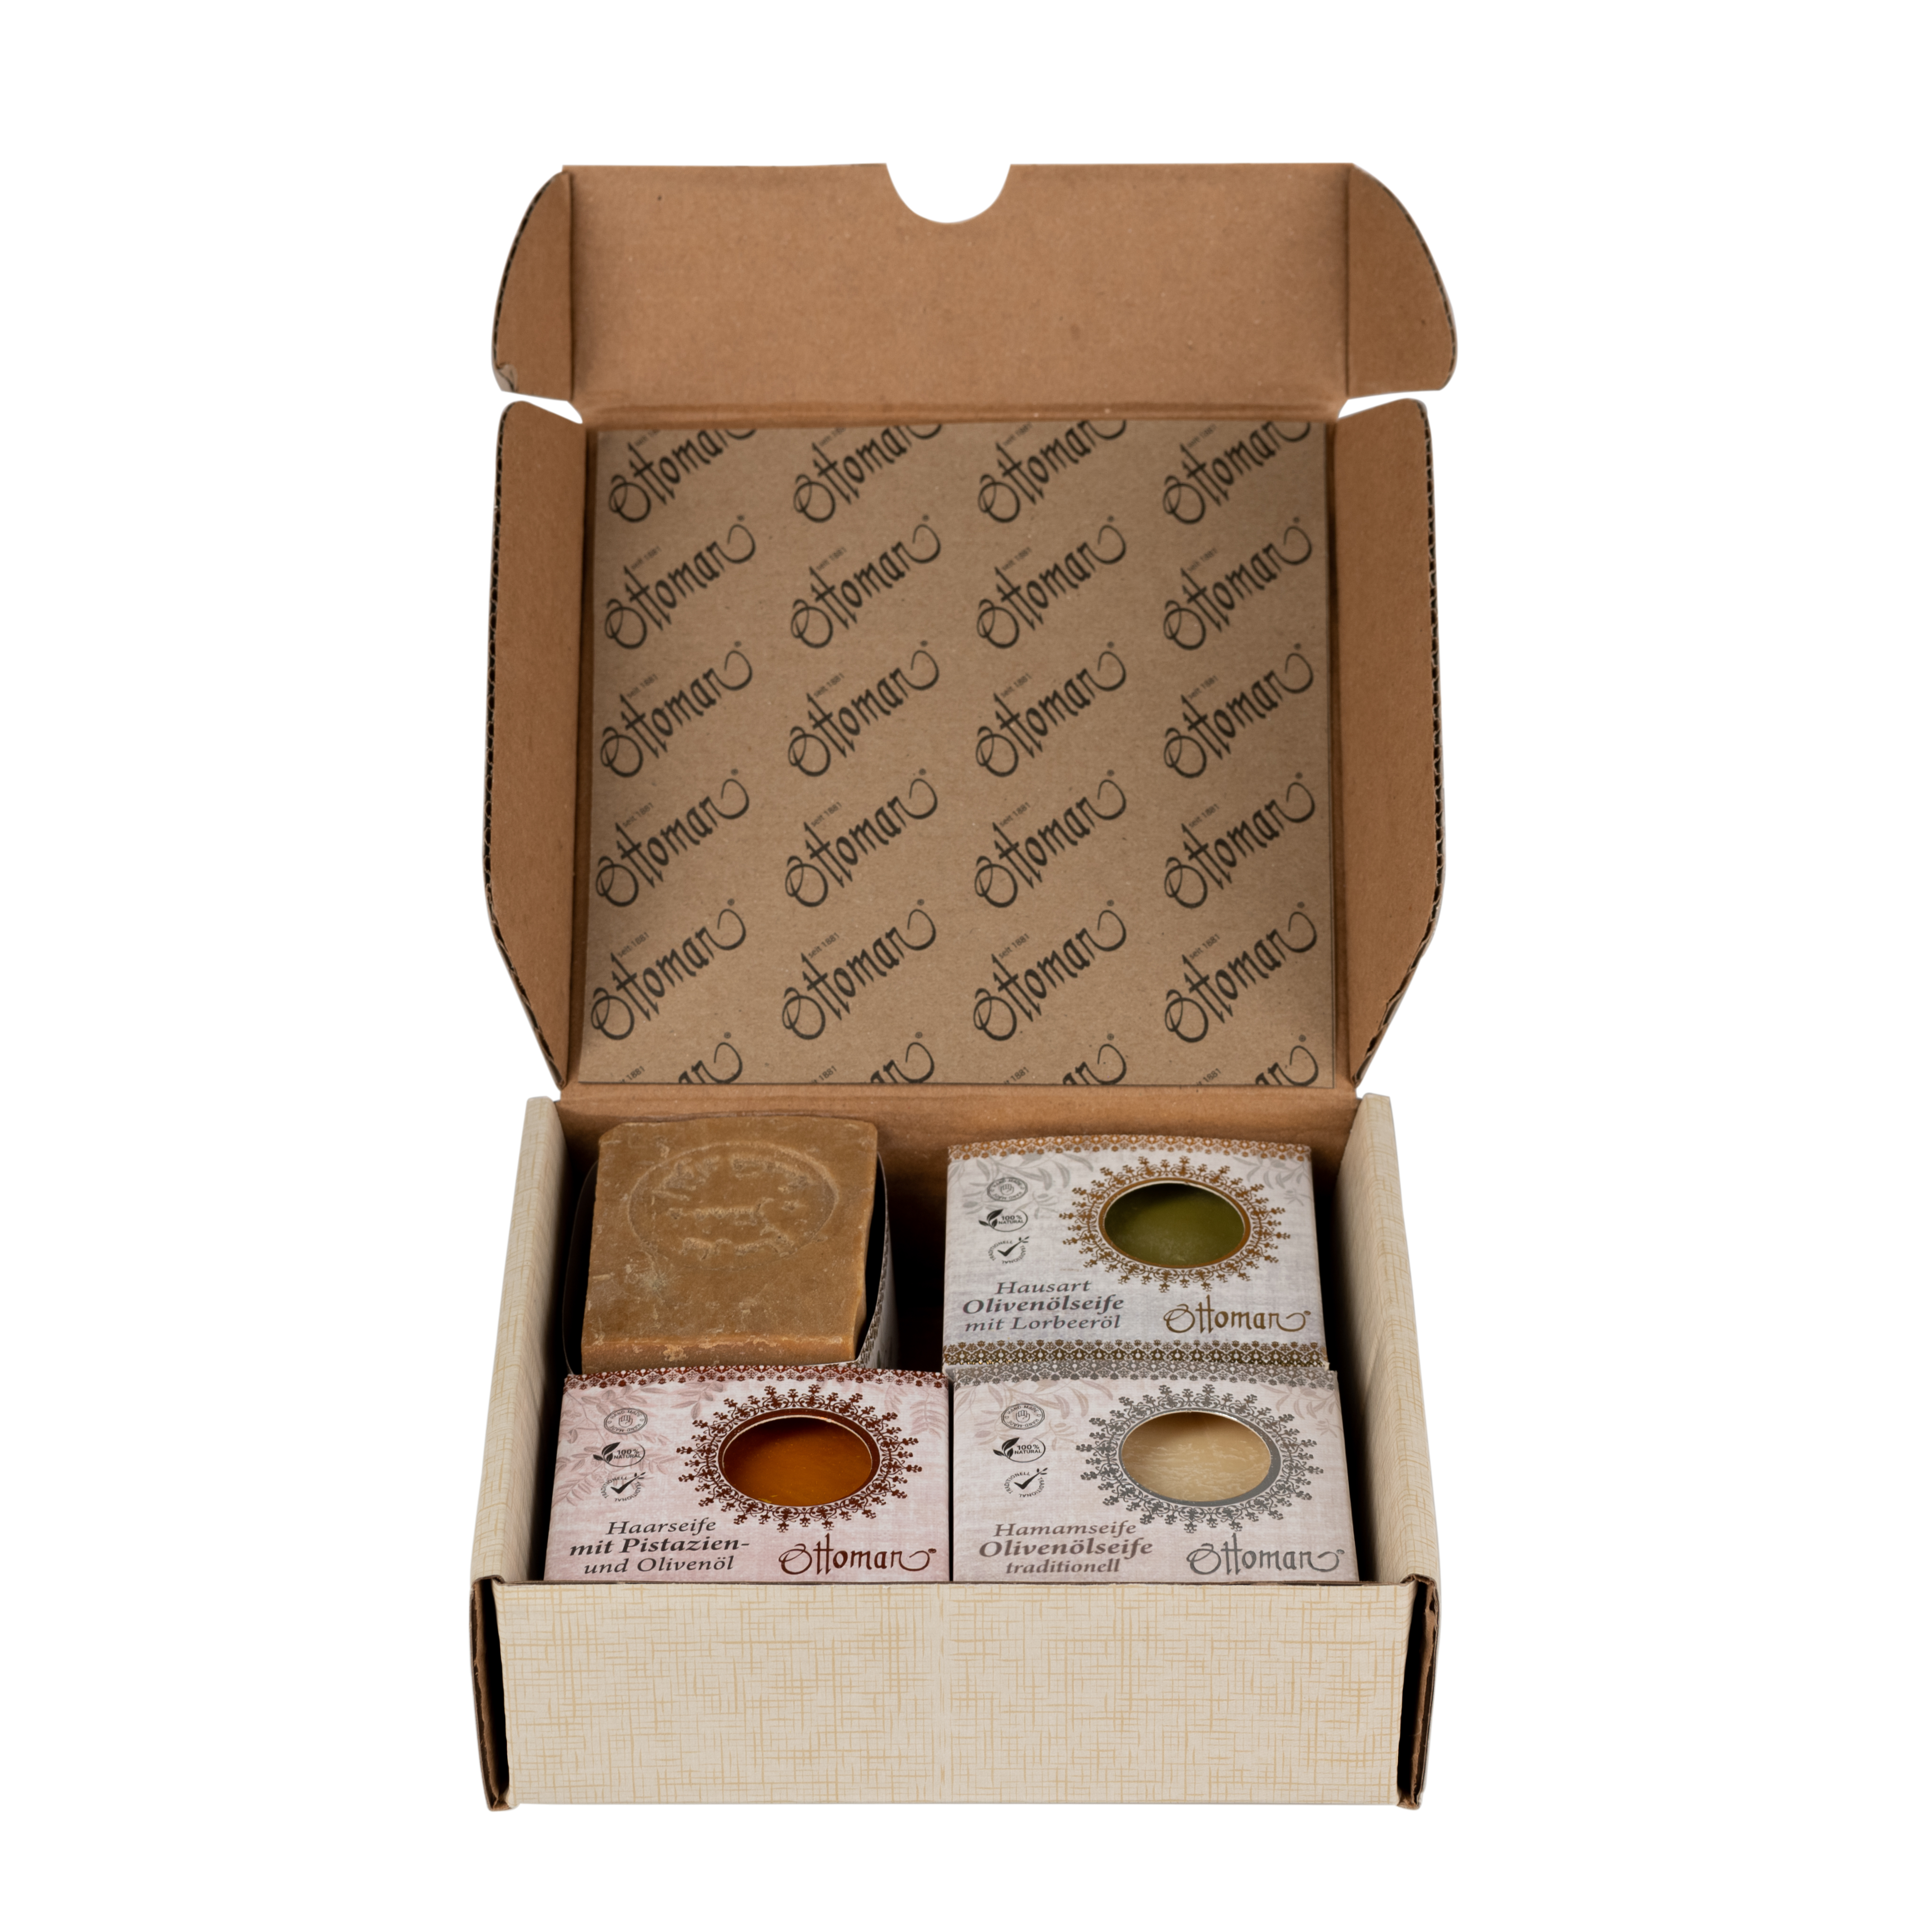 Soap Collection Set of 4 in a Gift Box